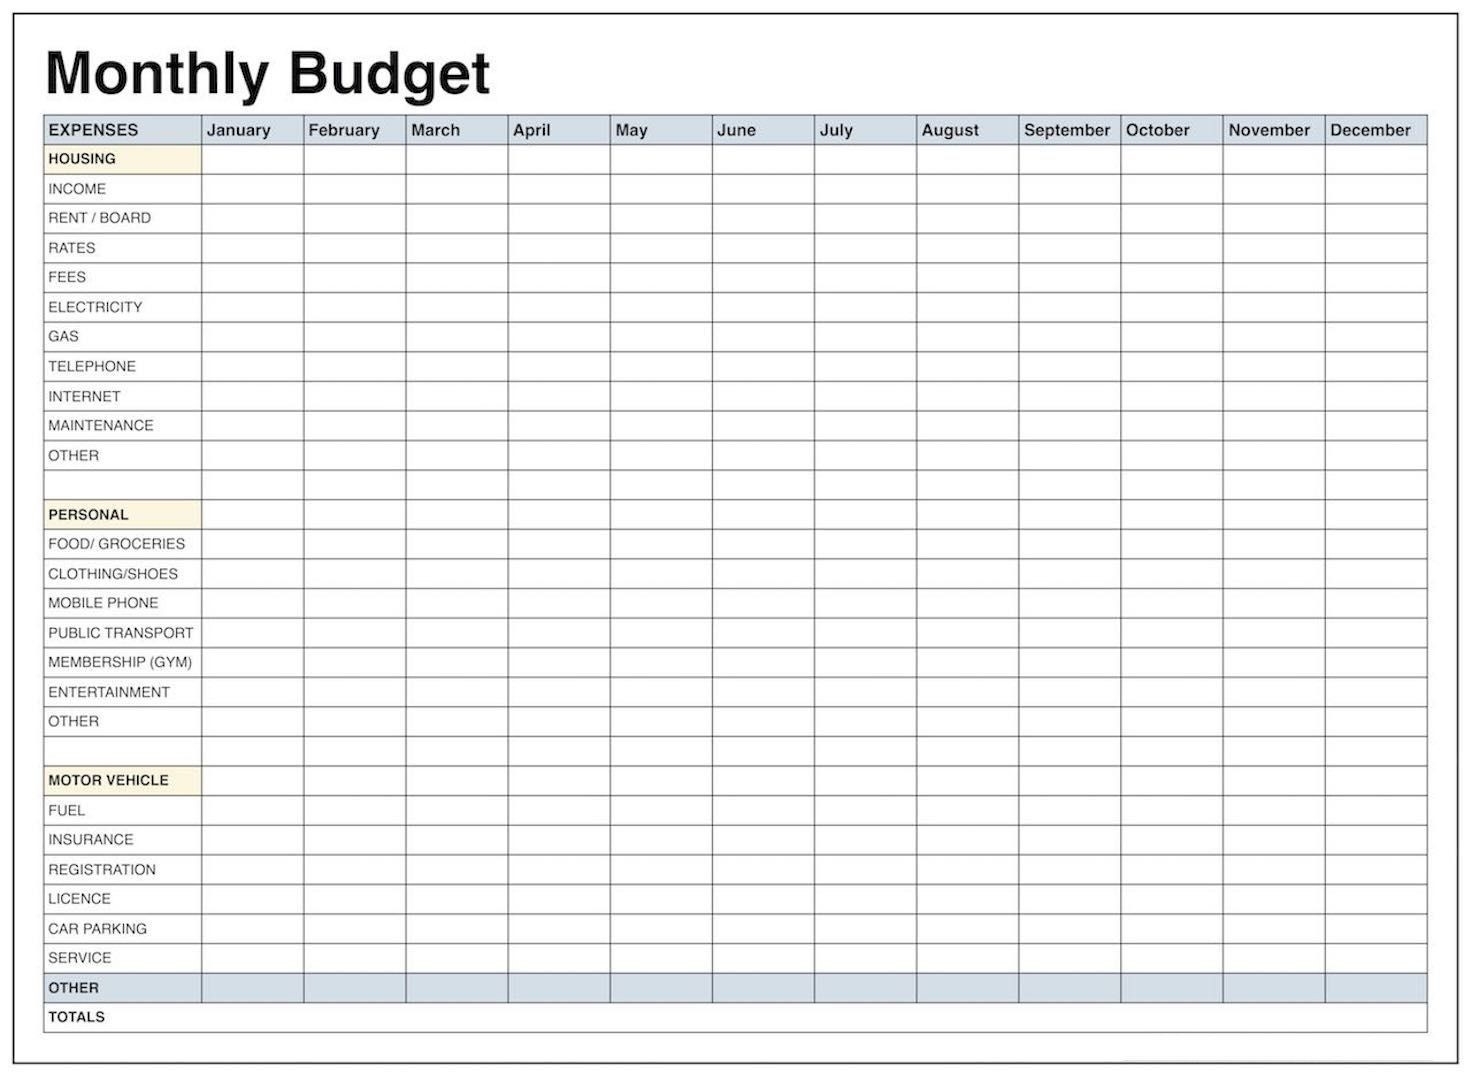 Budget Spreadsheet Template Excel | Monthly Budget Excel  Free Monthly Spreadsheet Templates